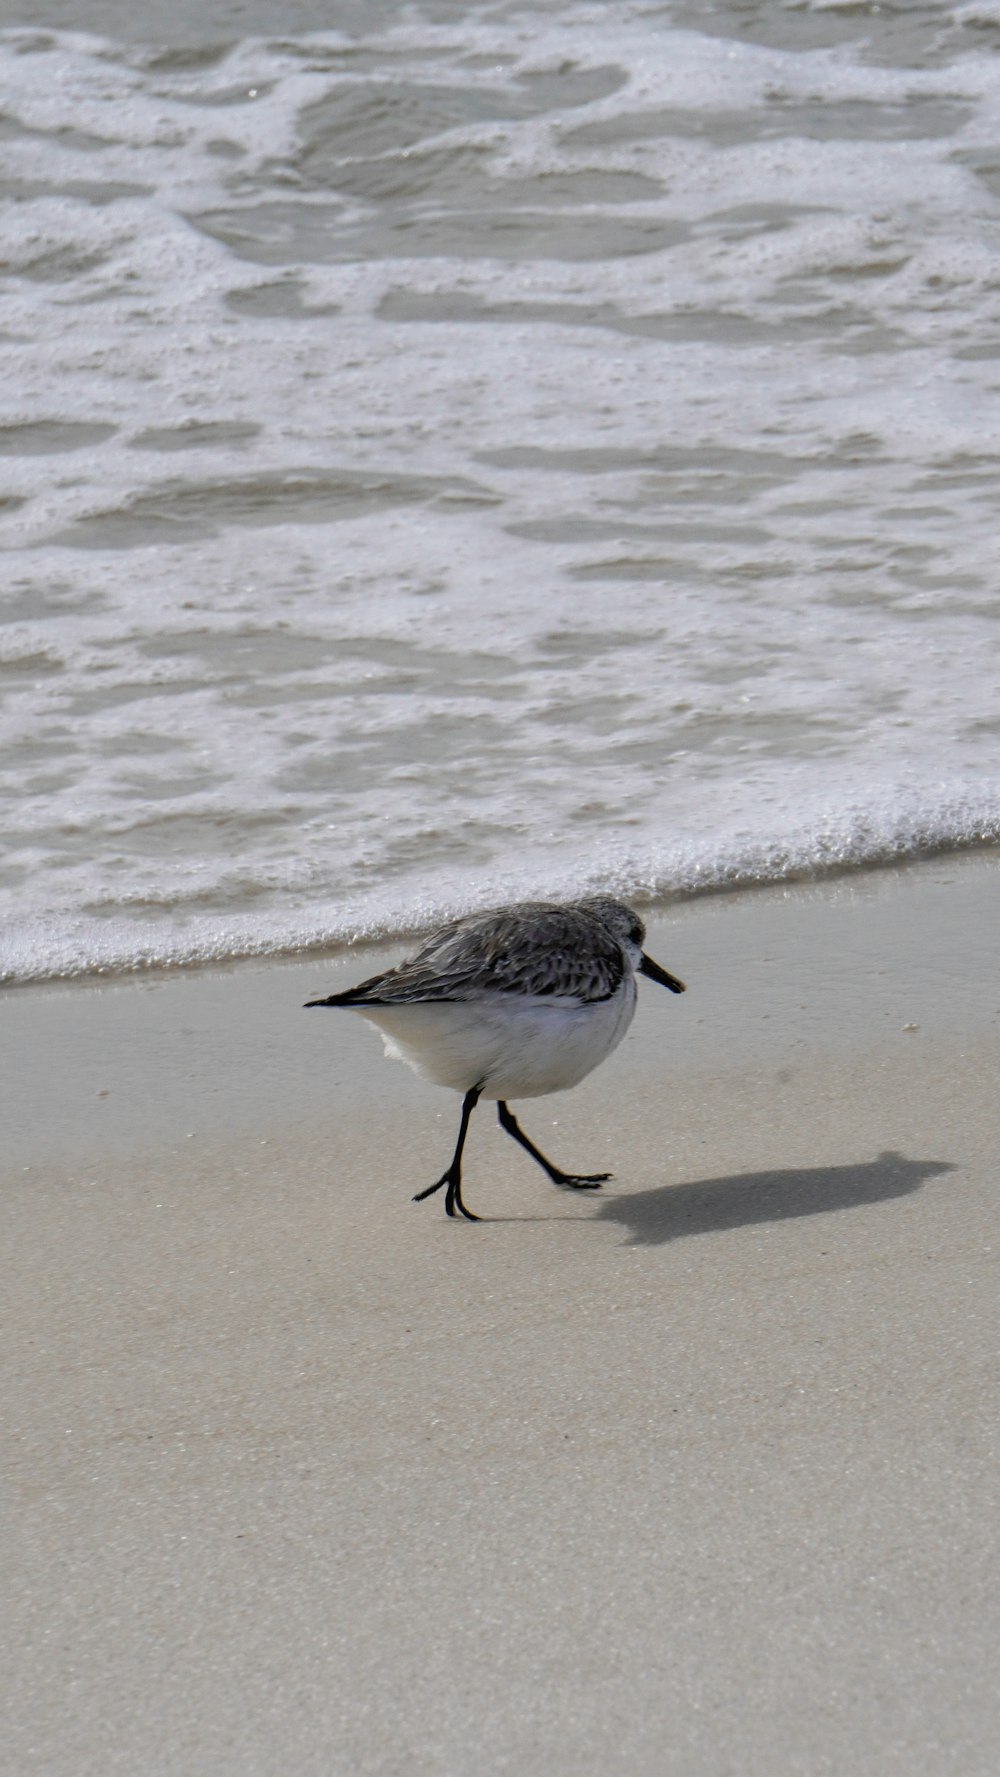 a small bird walking on the sand of a beach